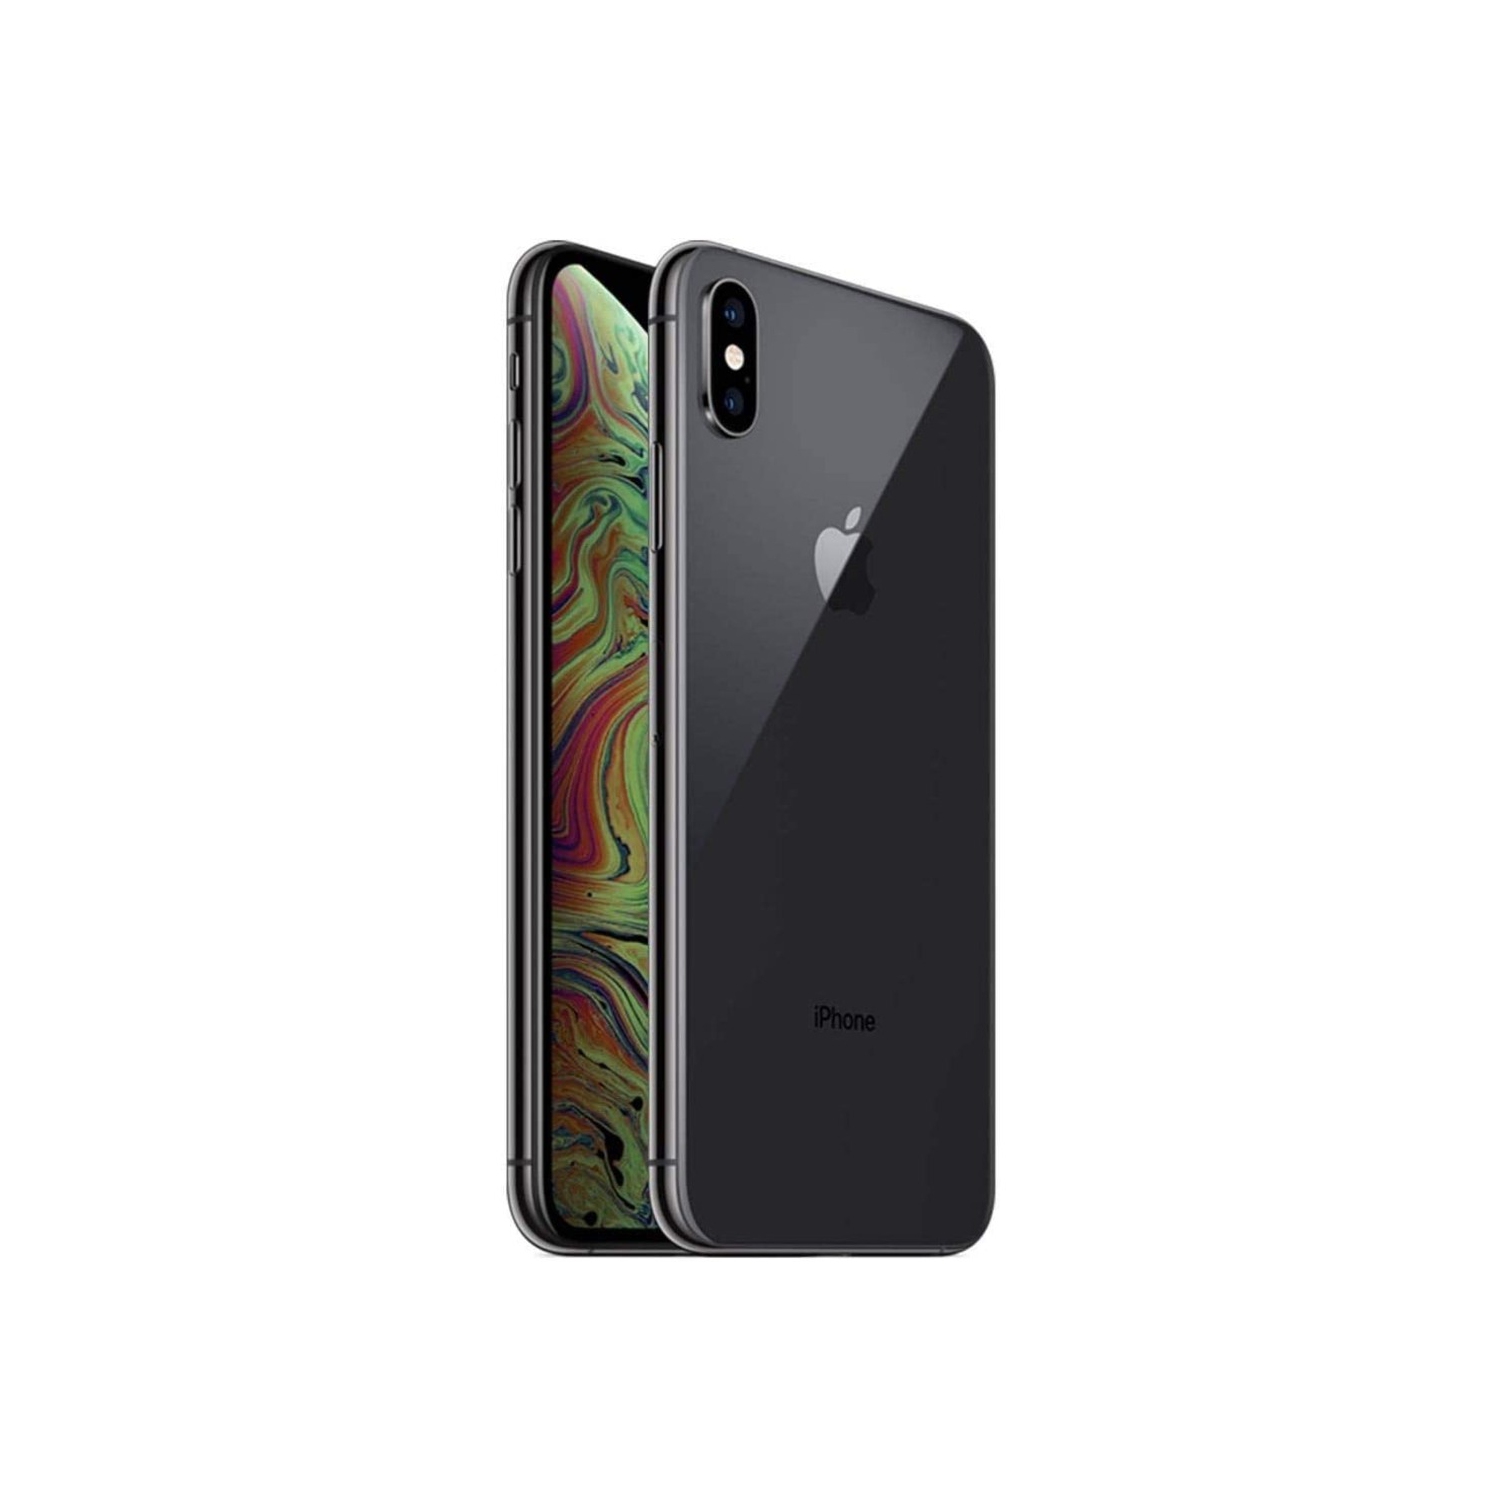 Refurbished (Excellent) - Apple iPhone XS Max 64GB Smartphone - Space Gray - Unlocked